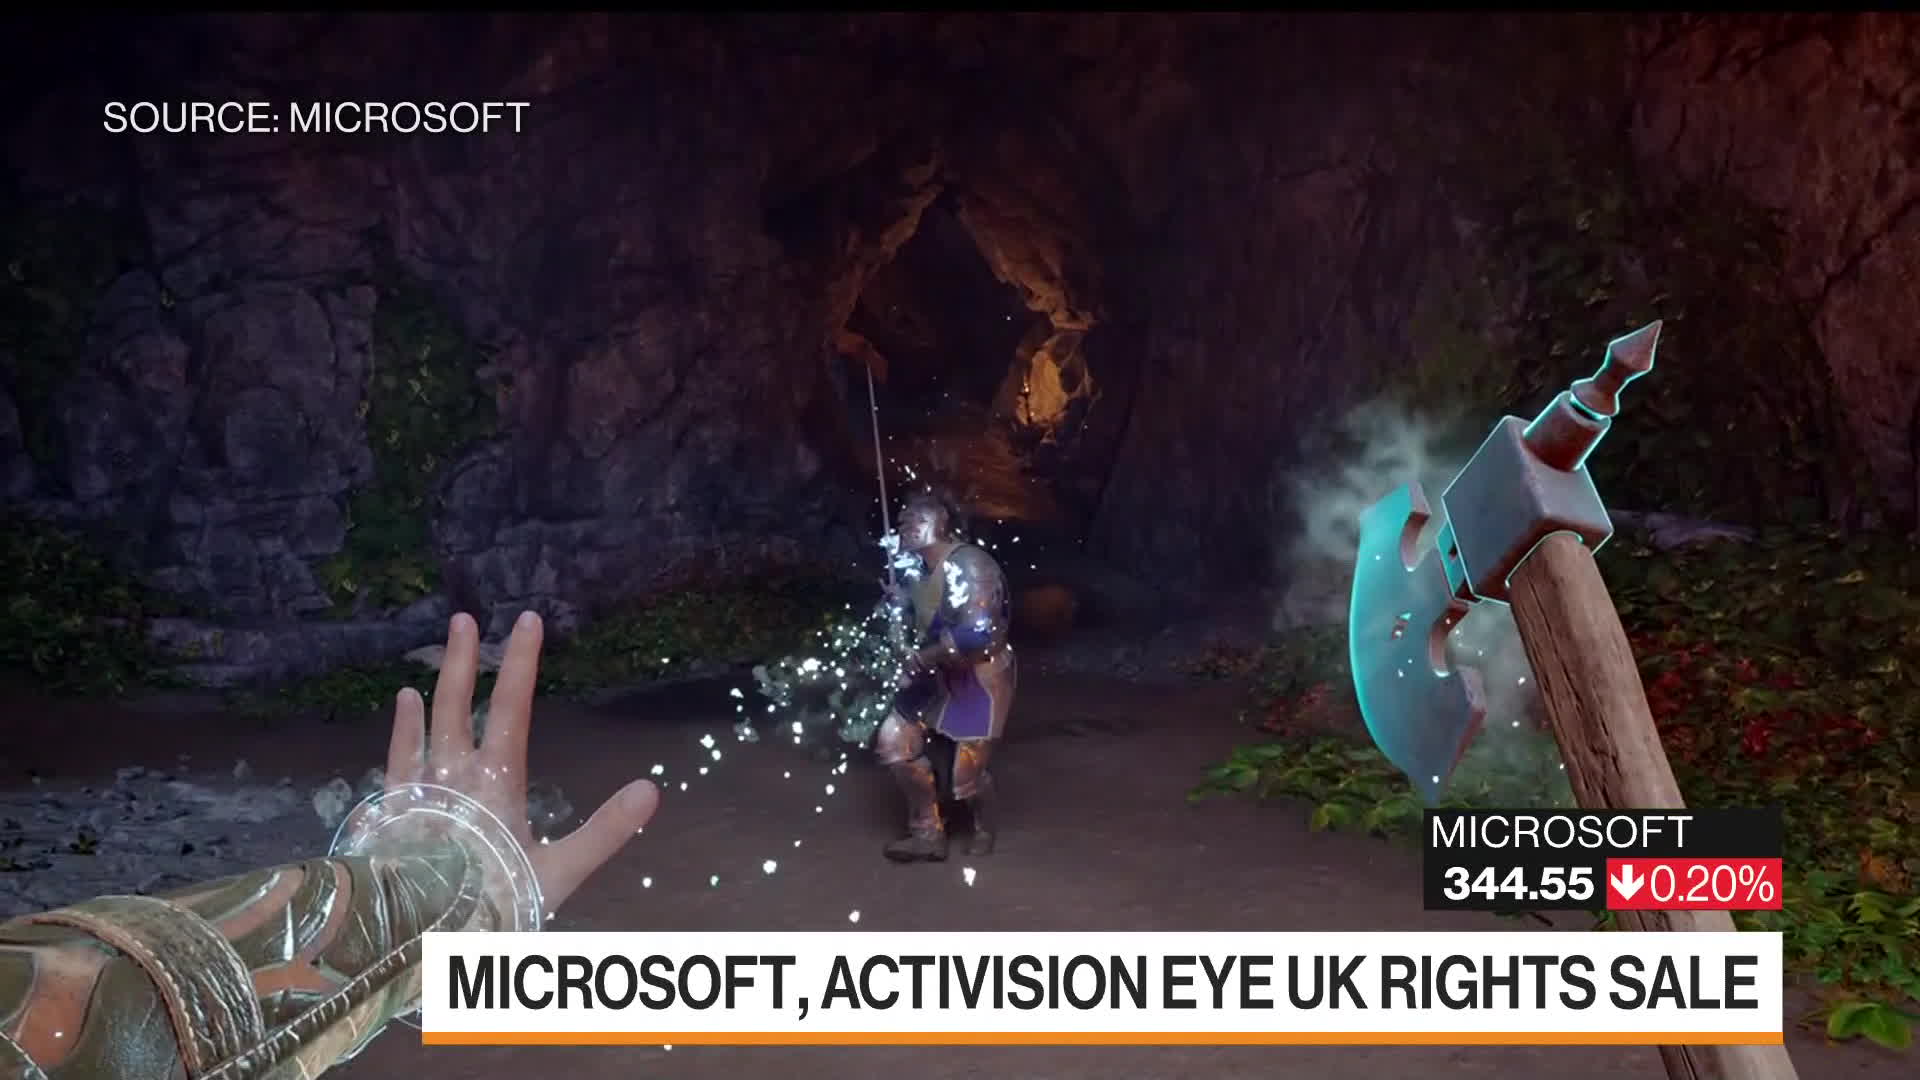 How Microsoft (MSFT) Revived Deal to Buy Activision Blizzard (ATVI) -  Bloomberg